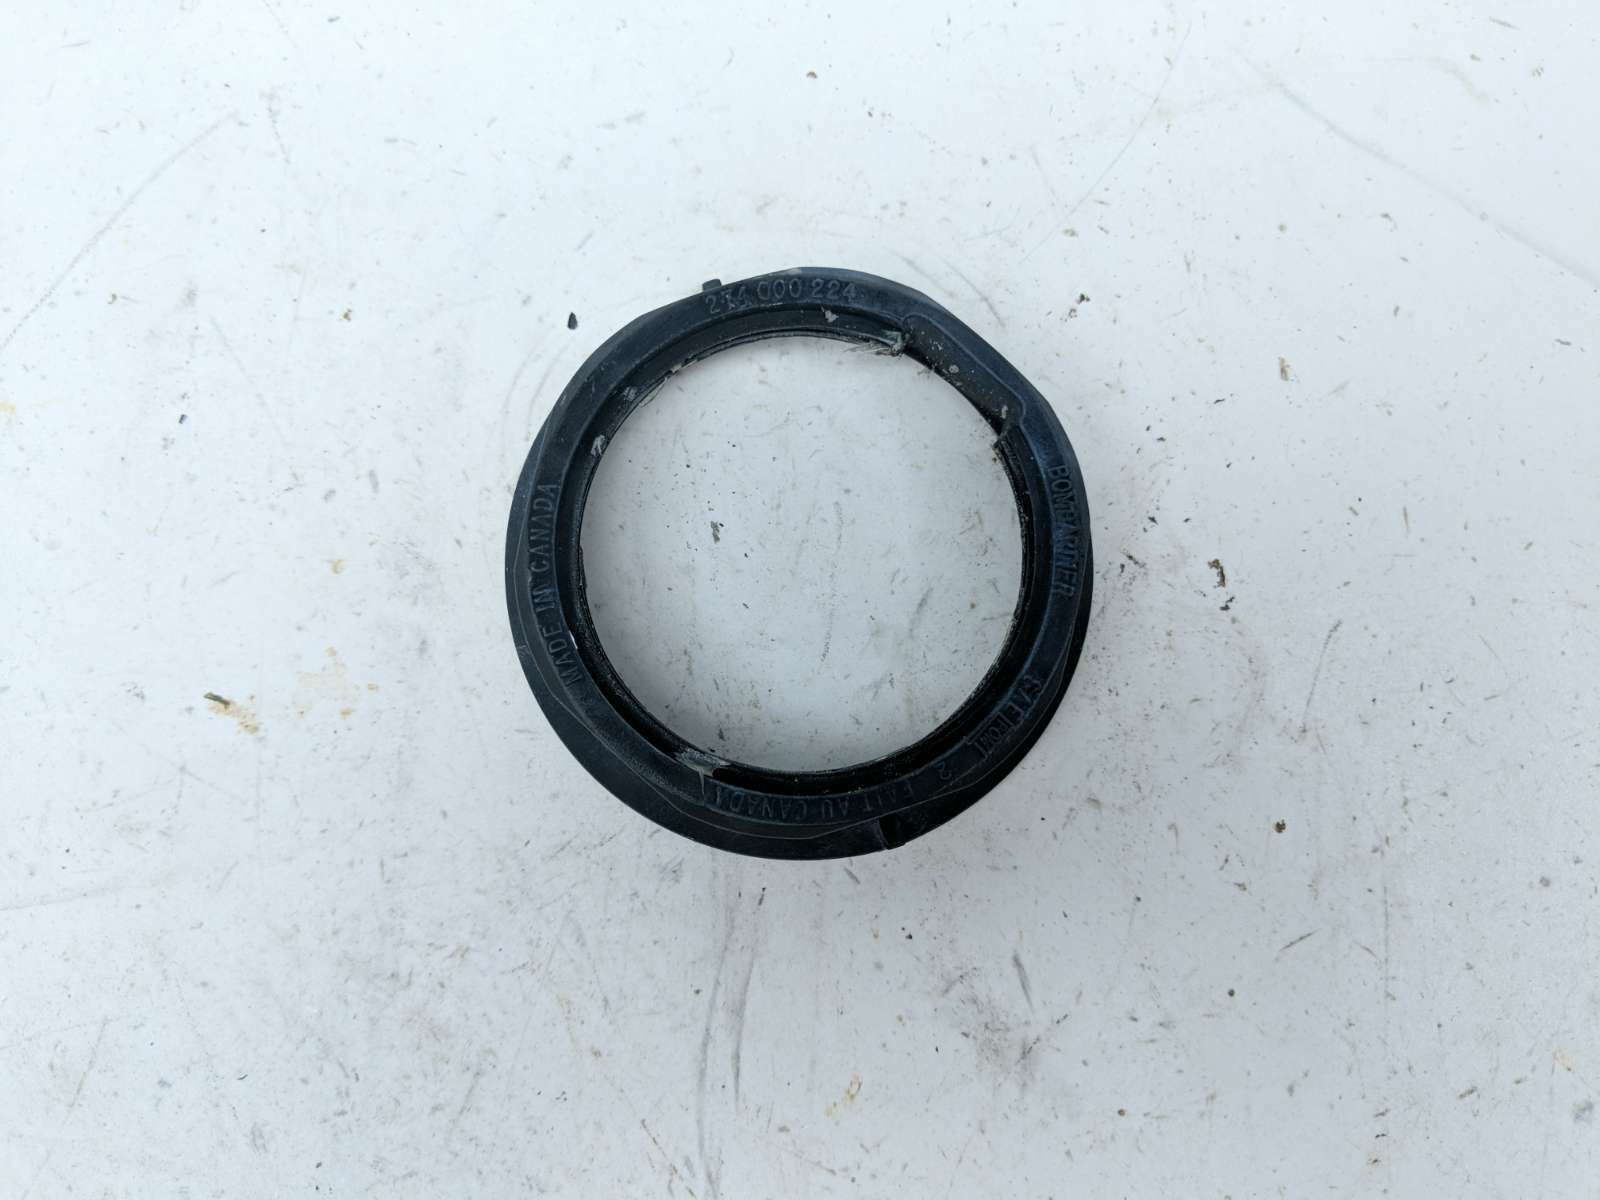 08 Seadoo RXP 255 Exhaust Outlet Dump Fitting Gasket